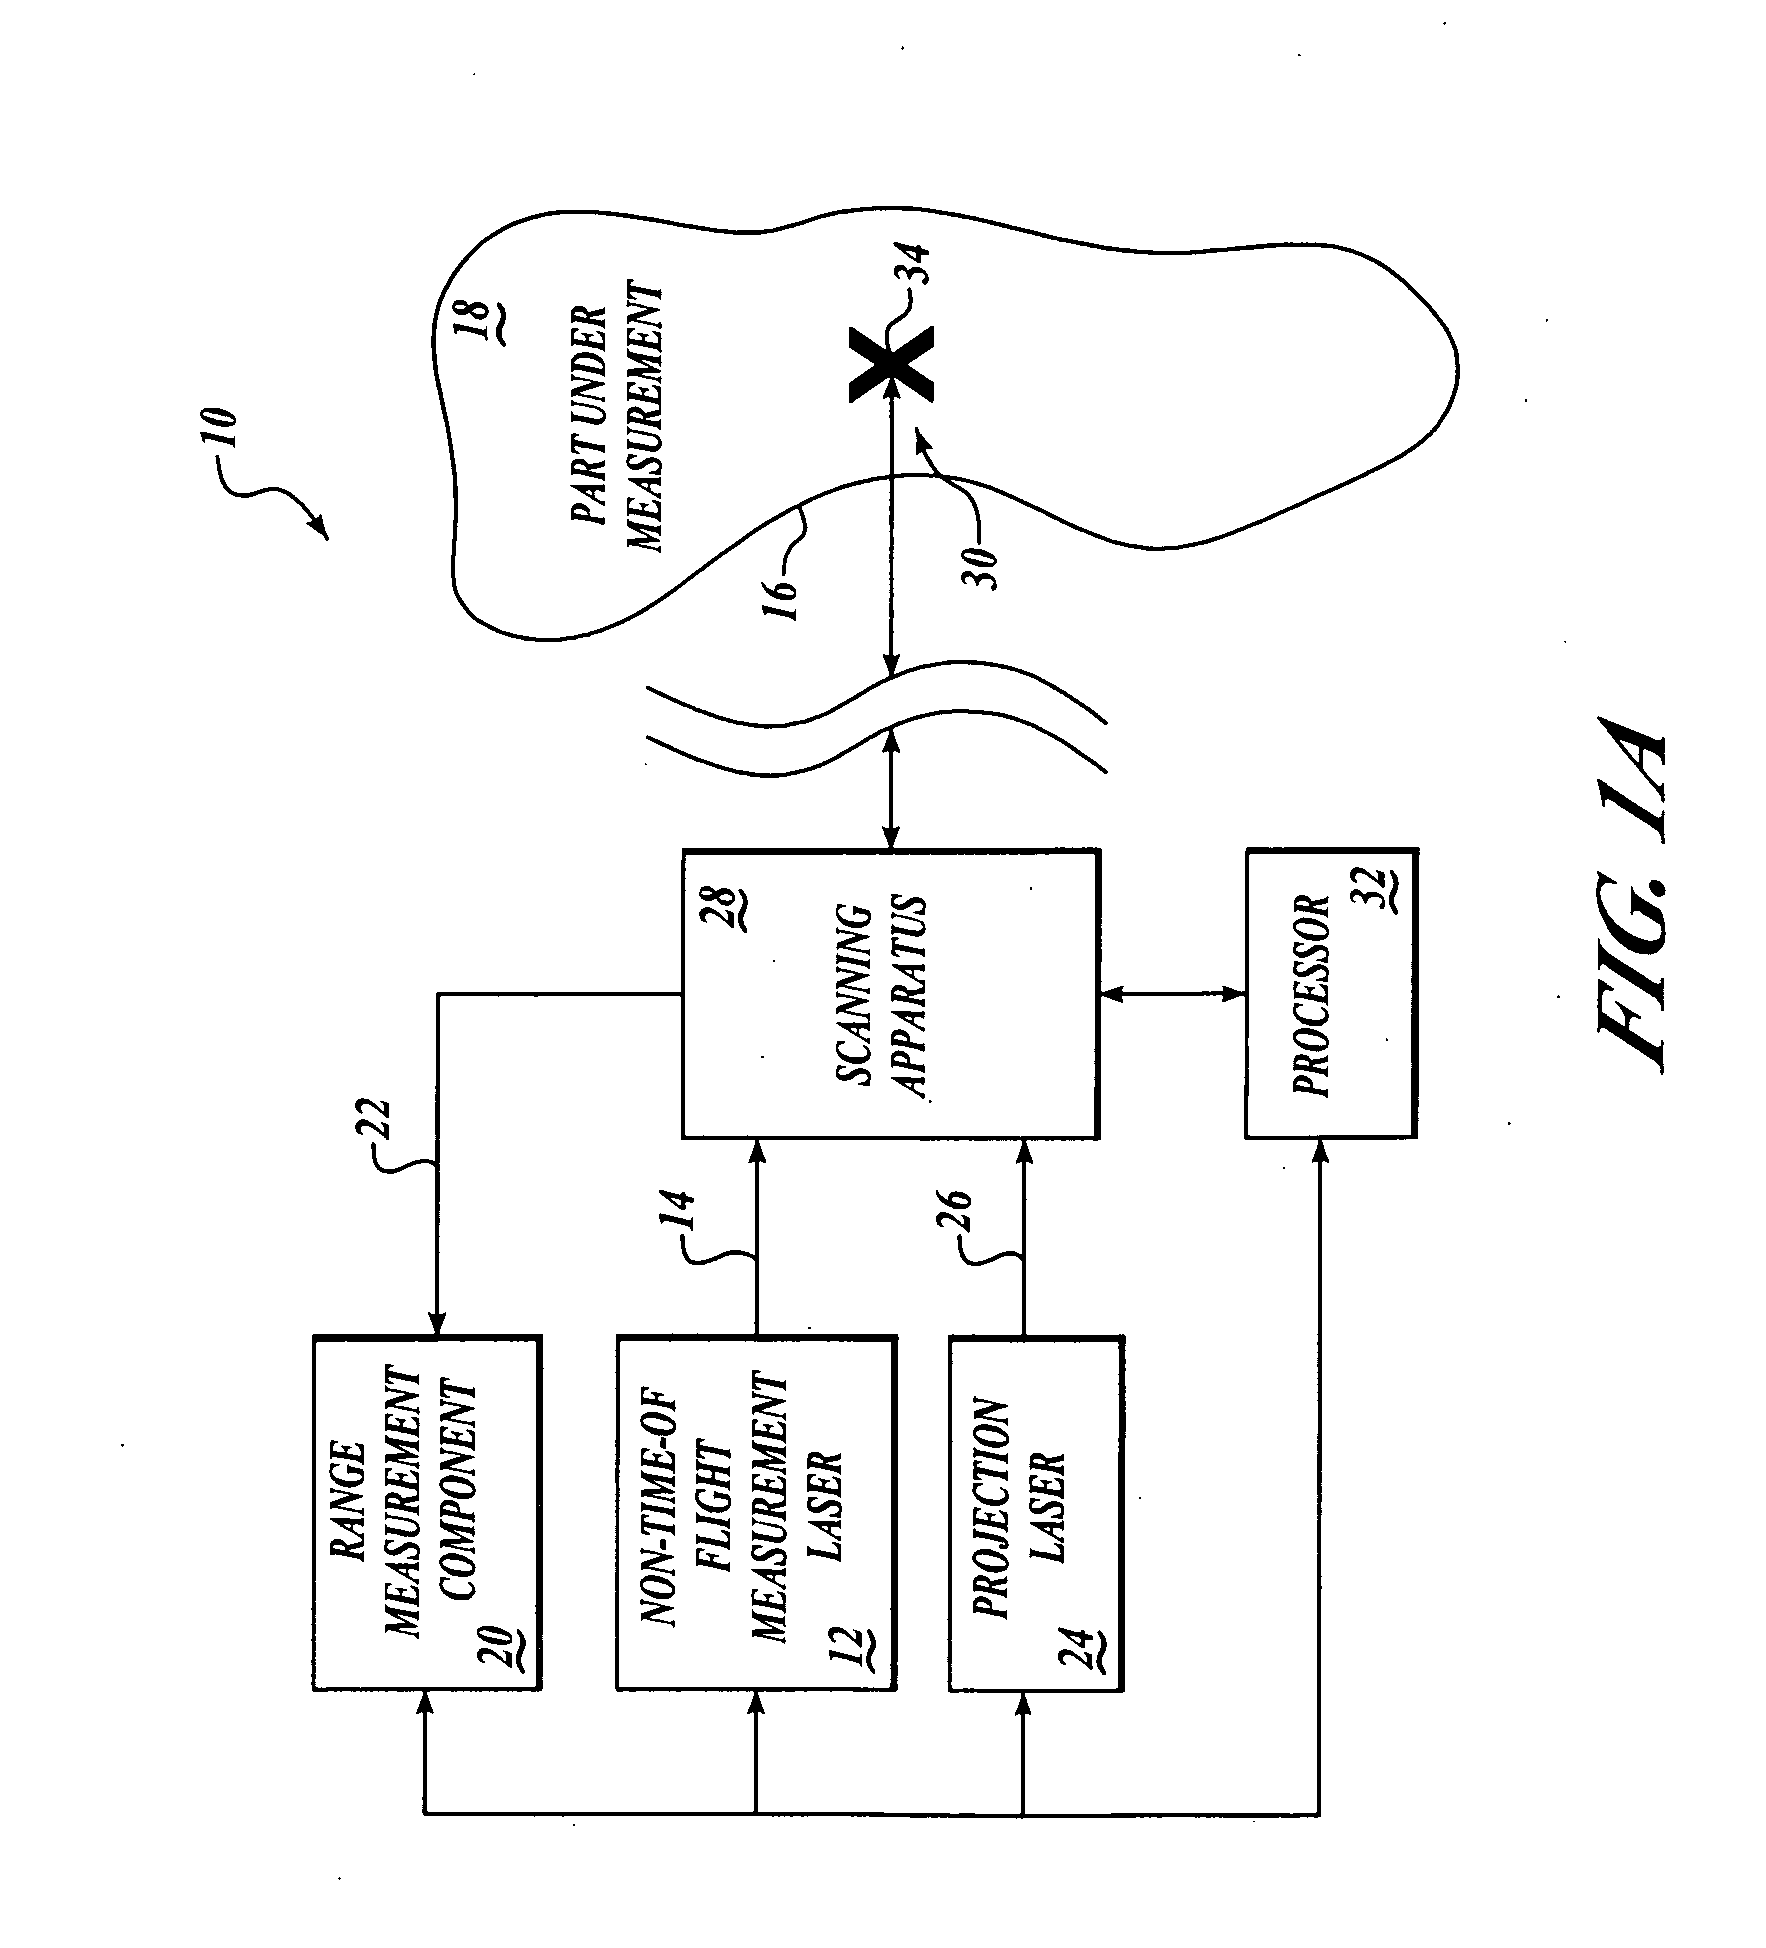 Method and apparatus for combining a targetless optical measurement function and optical projection of information